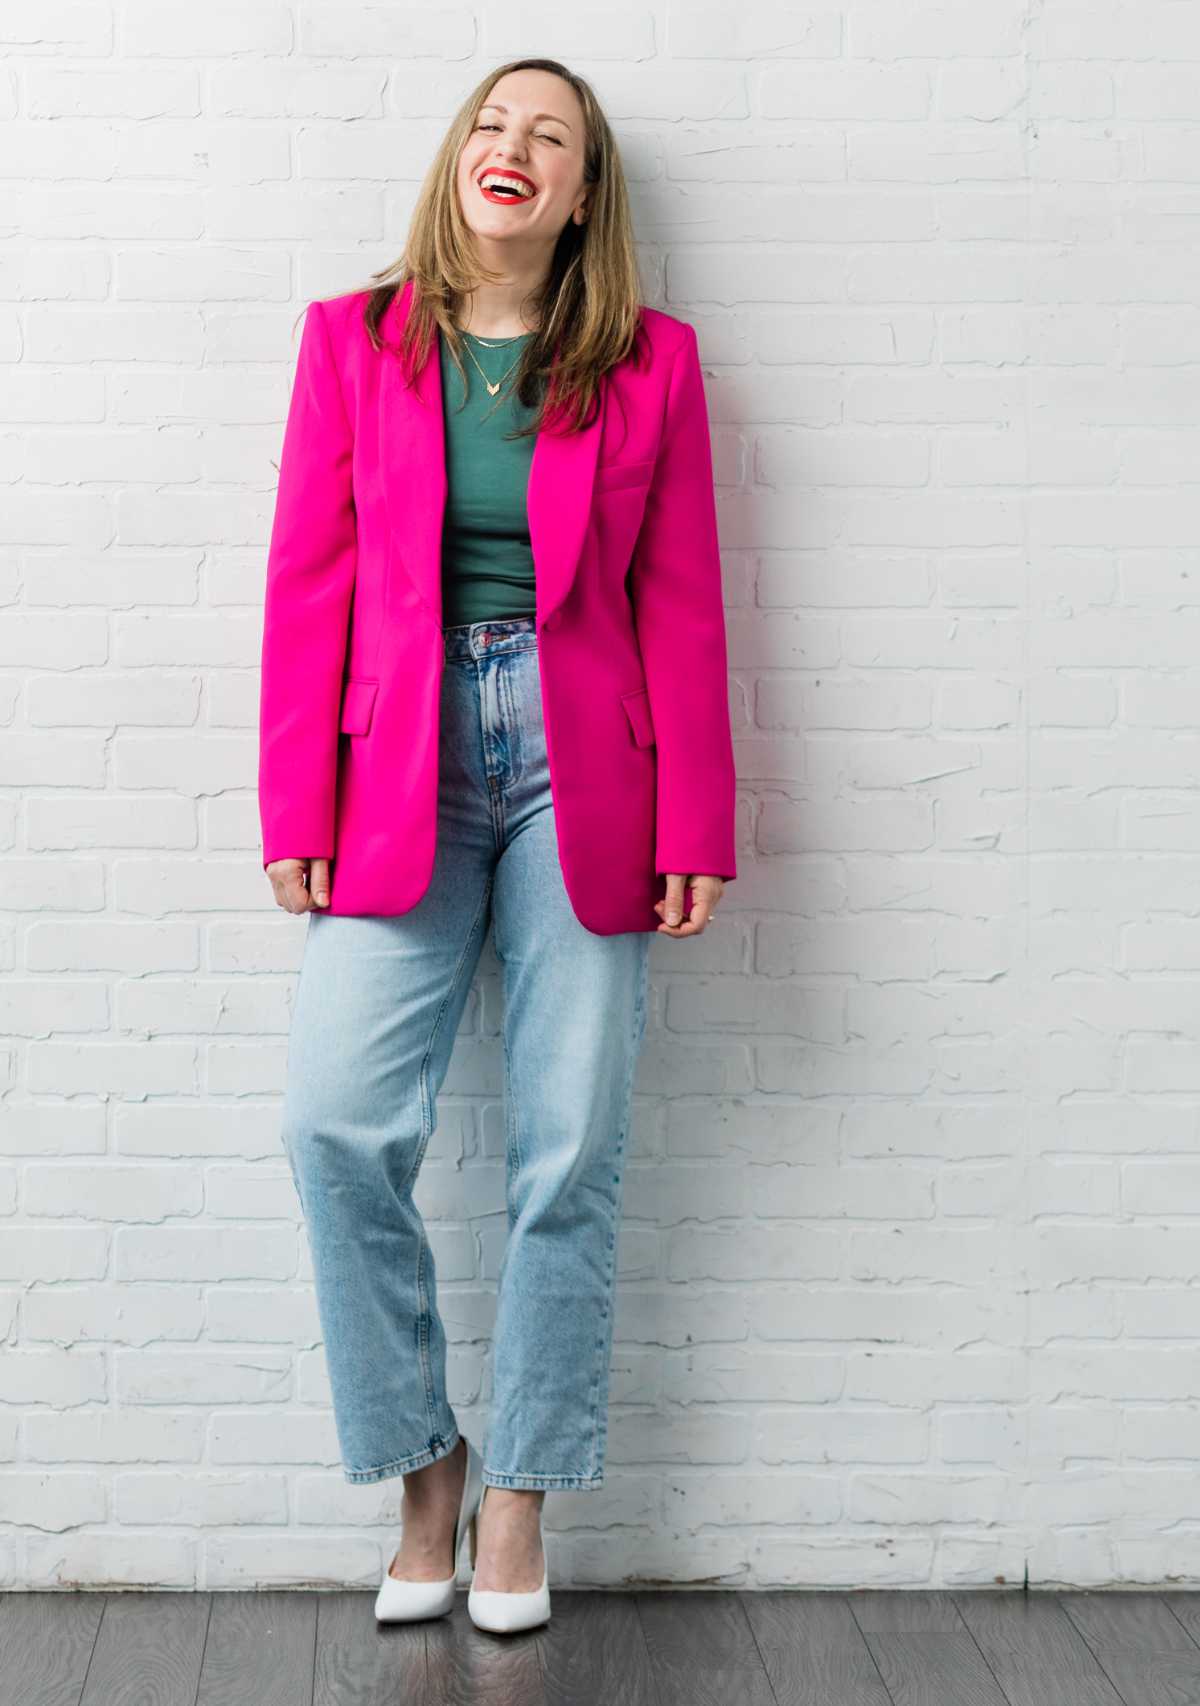 Blonde woman standing and leaning against a white brick wall wearing a hot pink blazer light blue jeans white heels and a green tshirt.